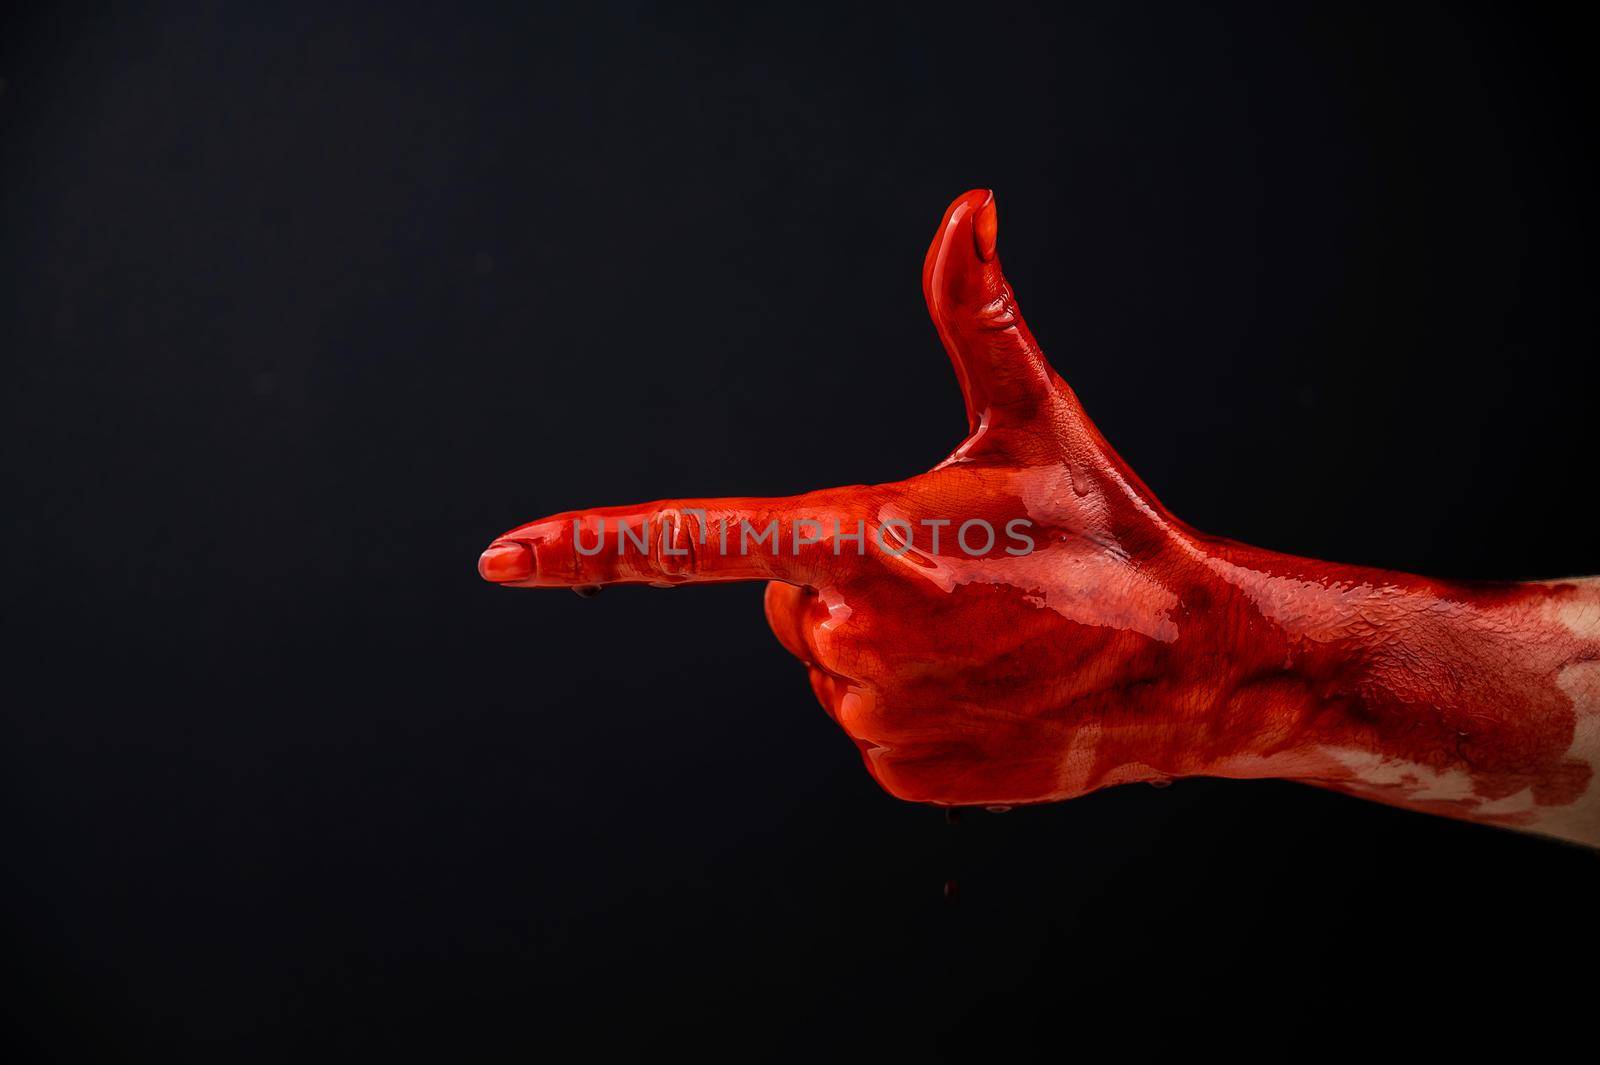 Woman's hand in blood shows a gesture of a gun on a black background